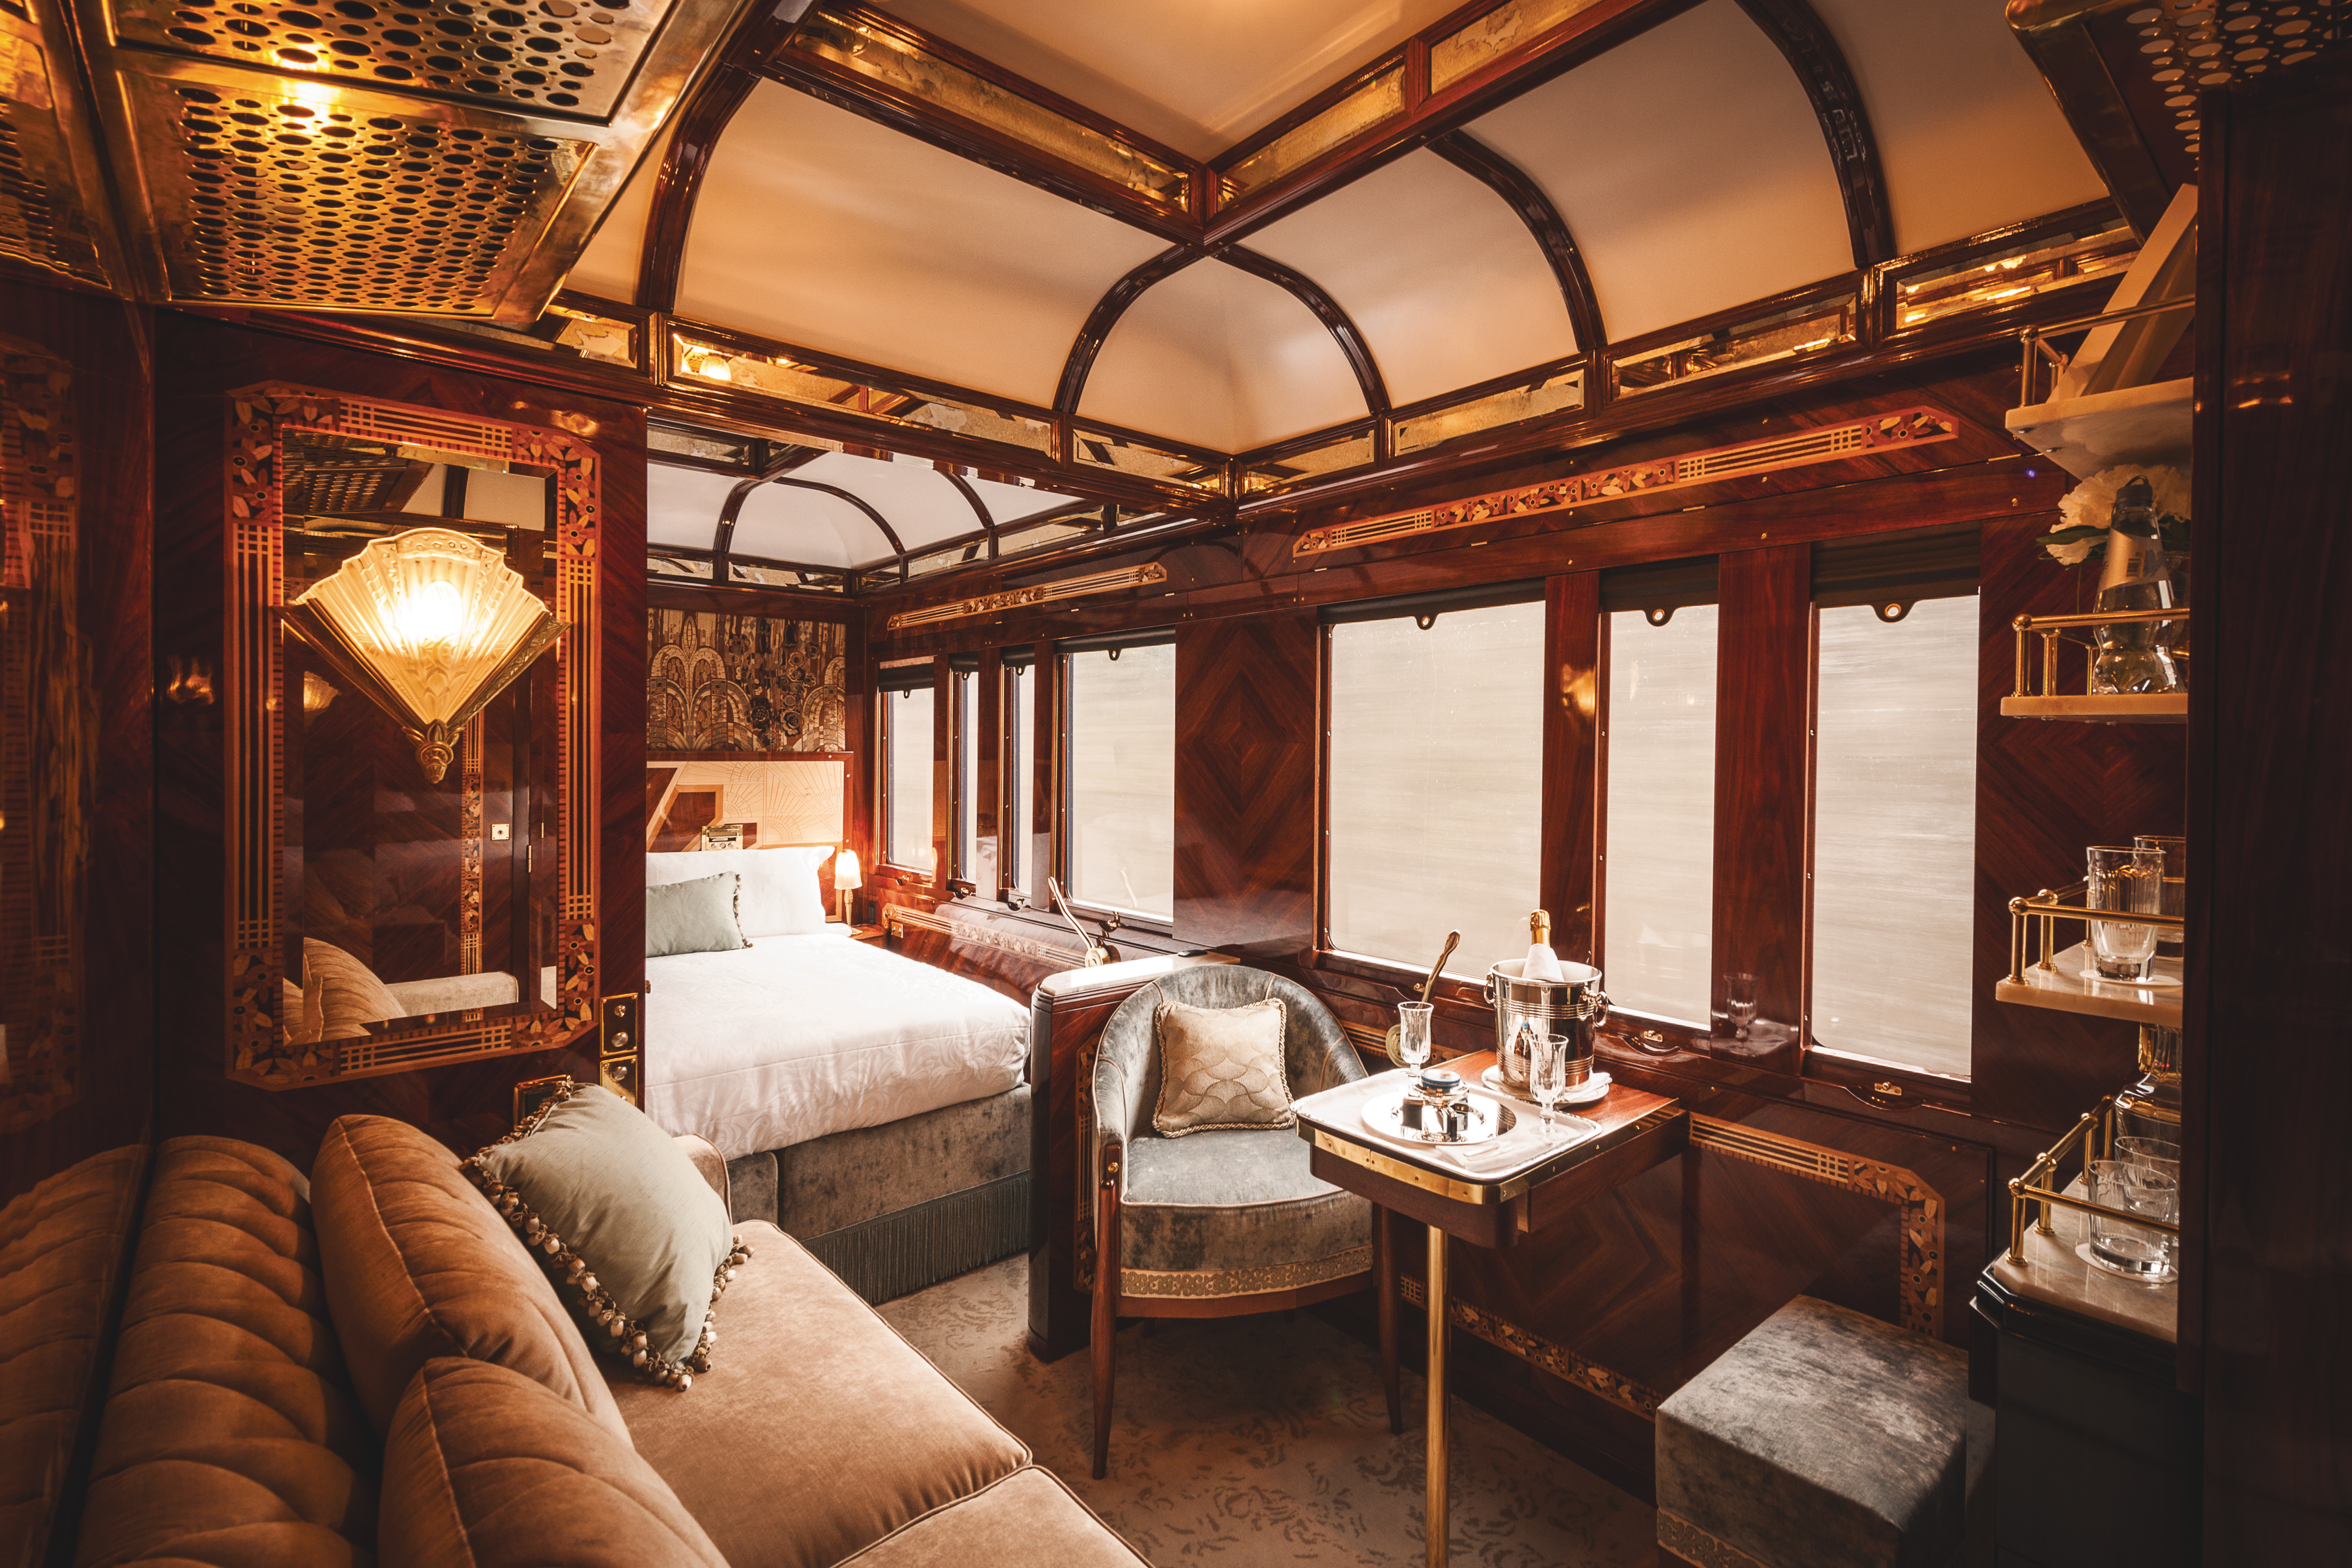 All aboard the Orient Express! But which one? We cut through the confusion  - The Globe and Mail